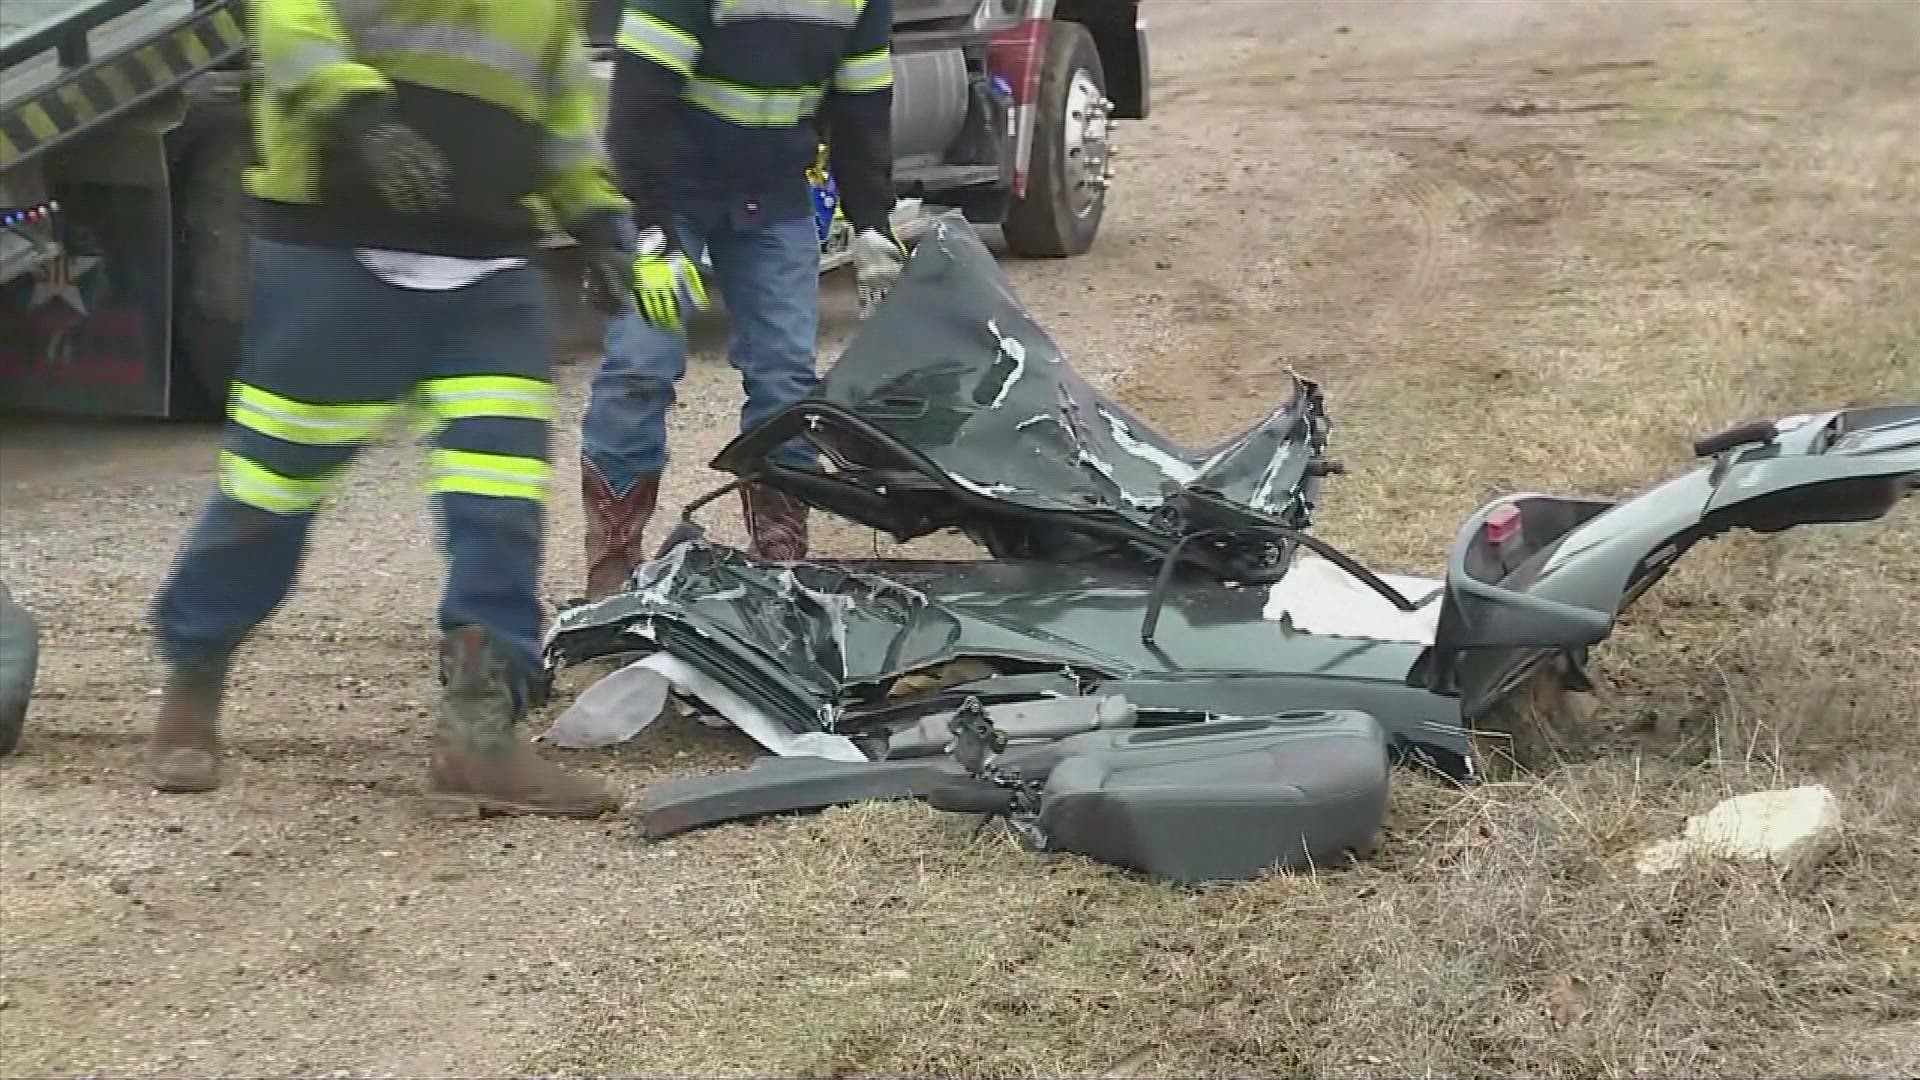 On Tuesday afternoon, the Oklahoma Highway Patrol confirmed that six females were killed in a crash in Tishomingo.